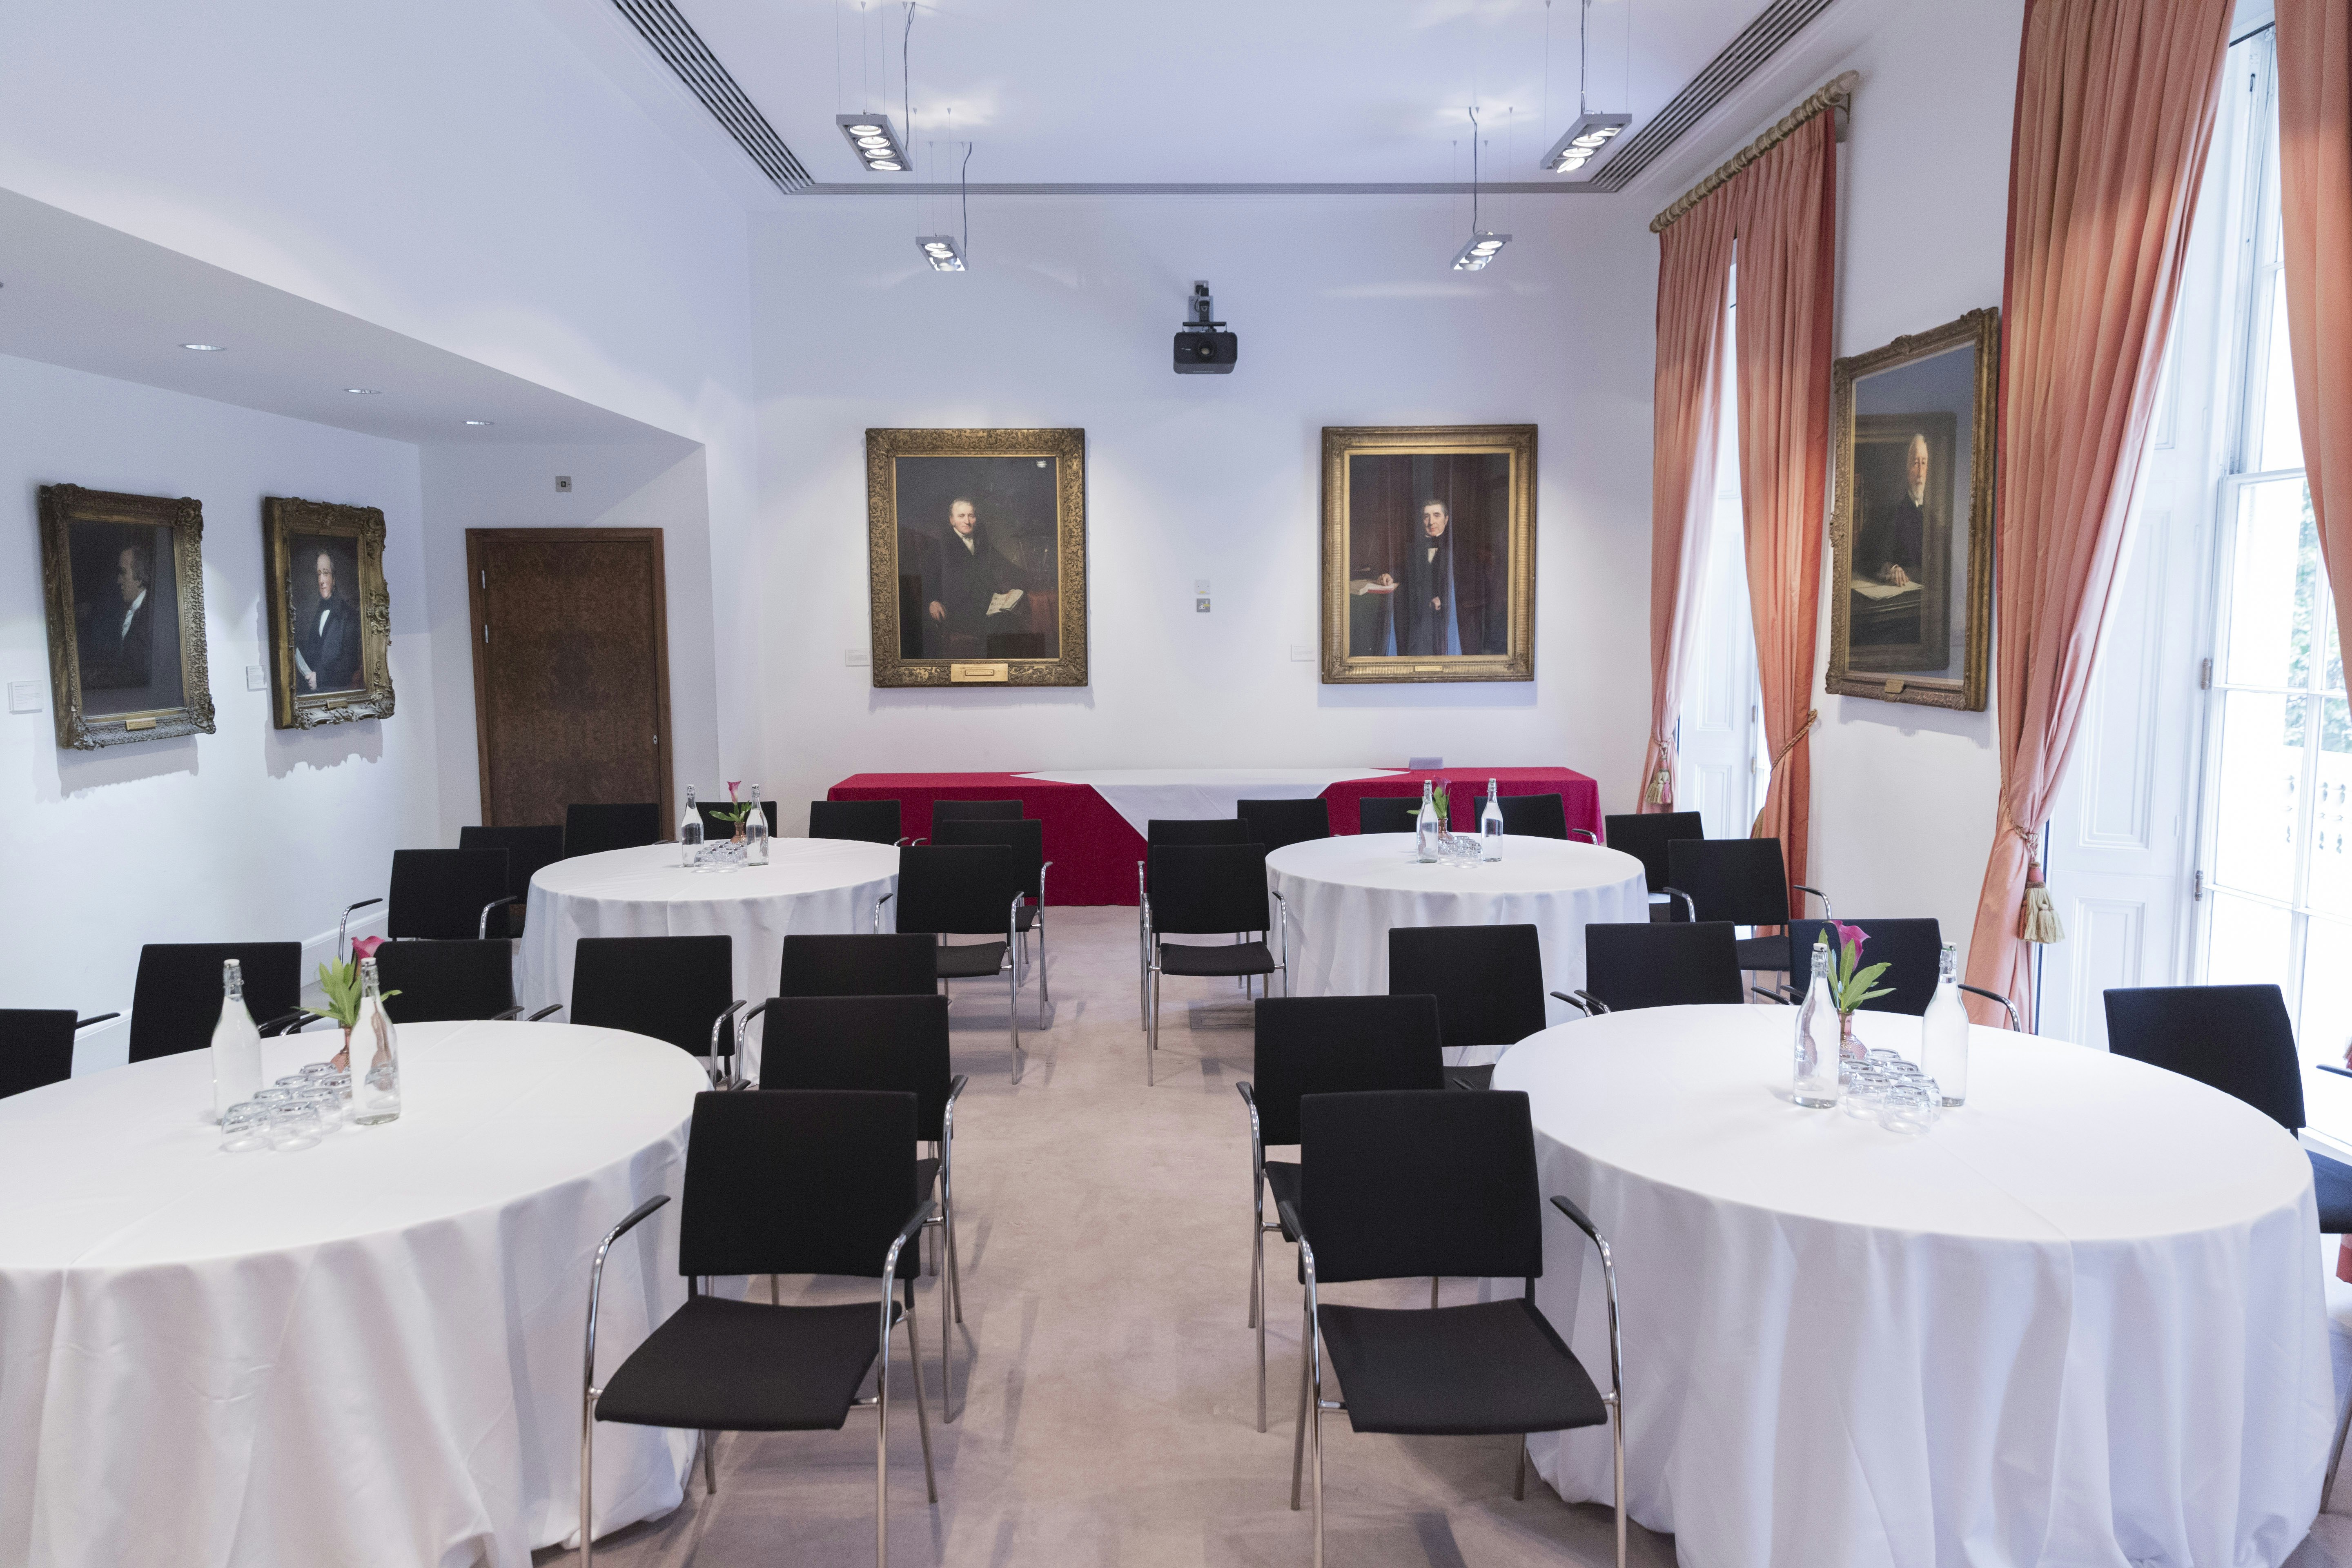 The Royal Society - The Conference Room image 5